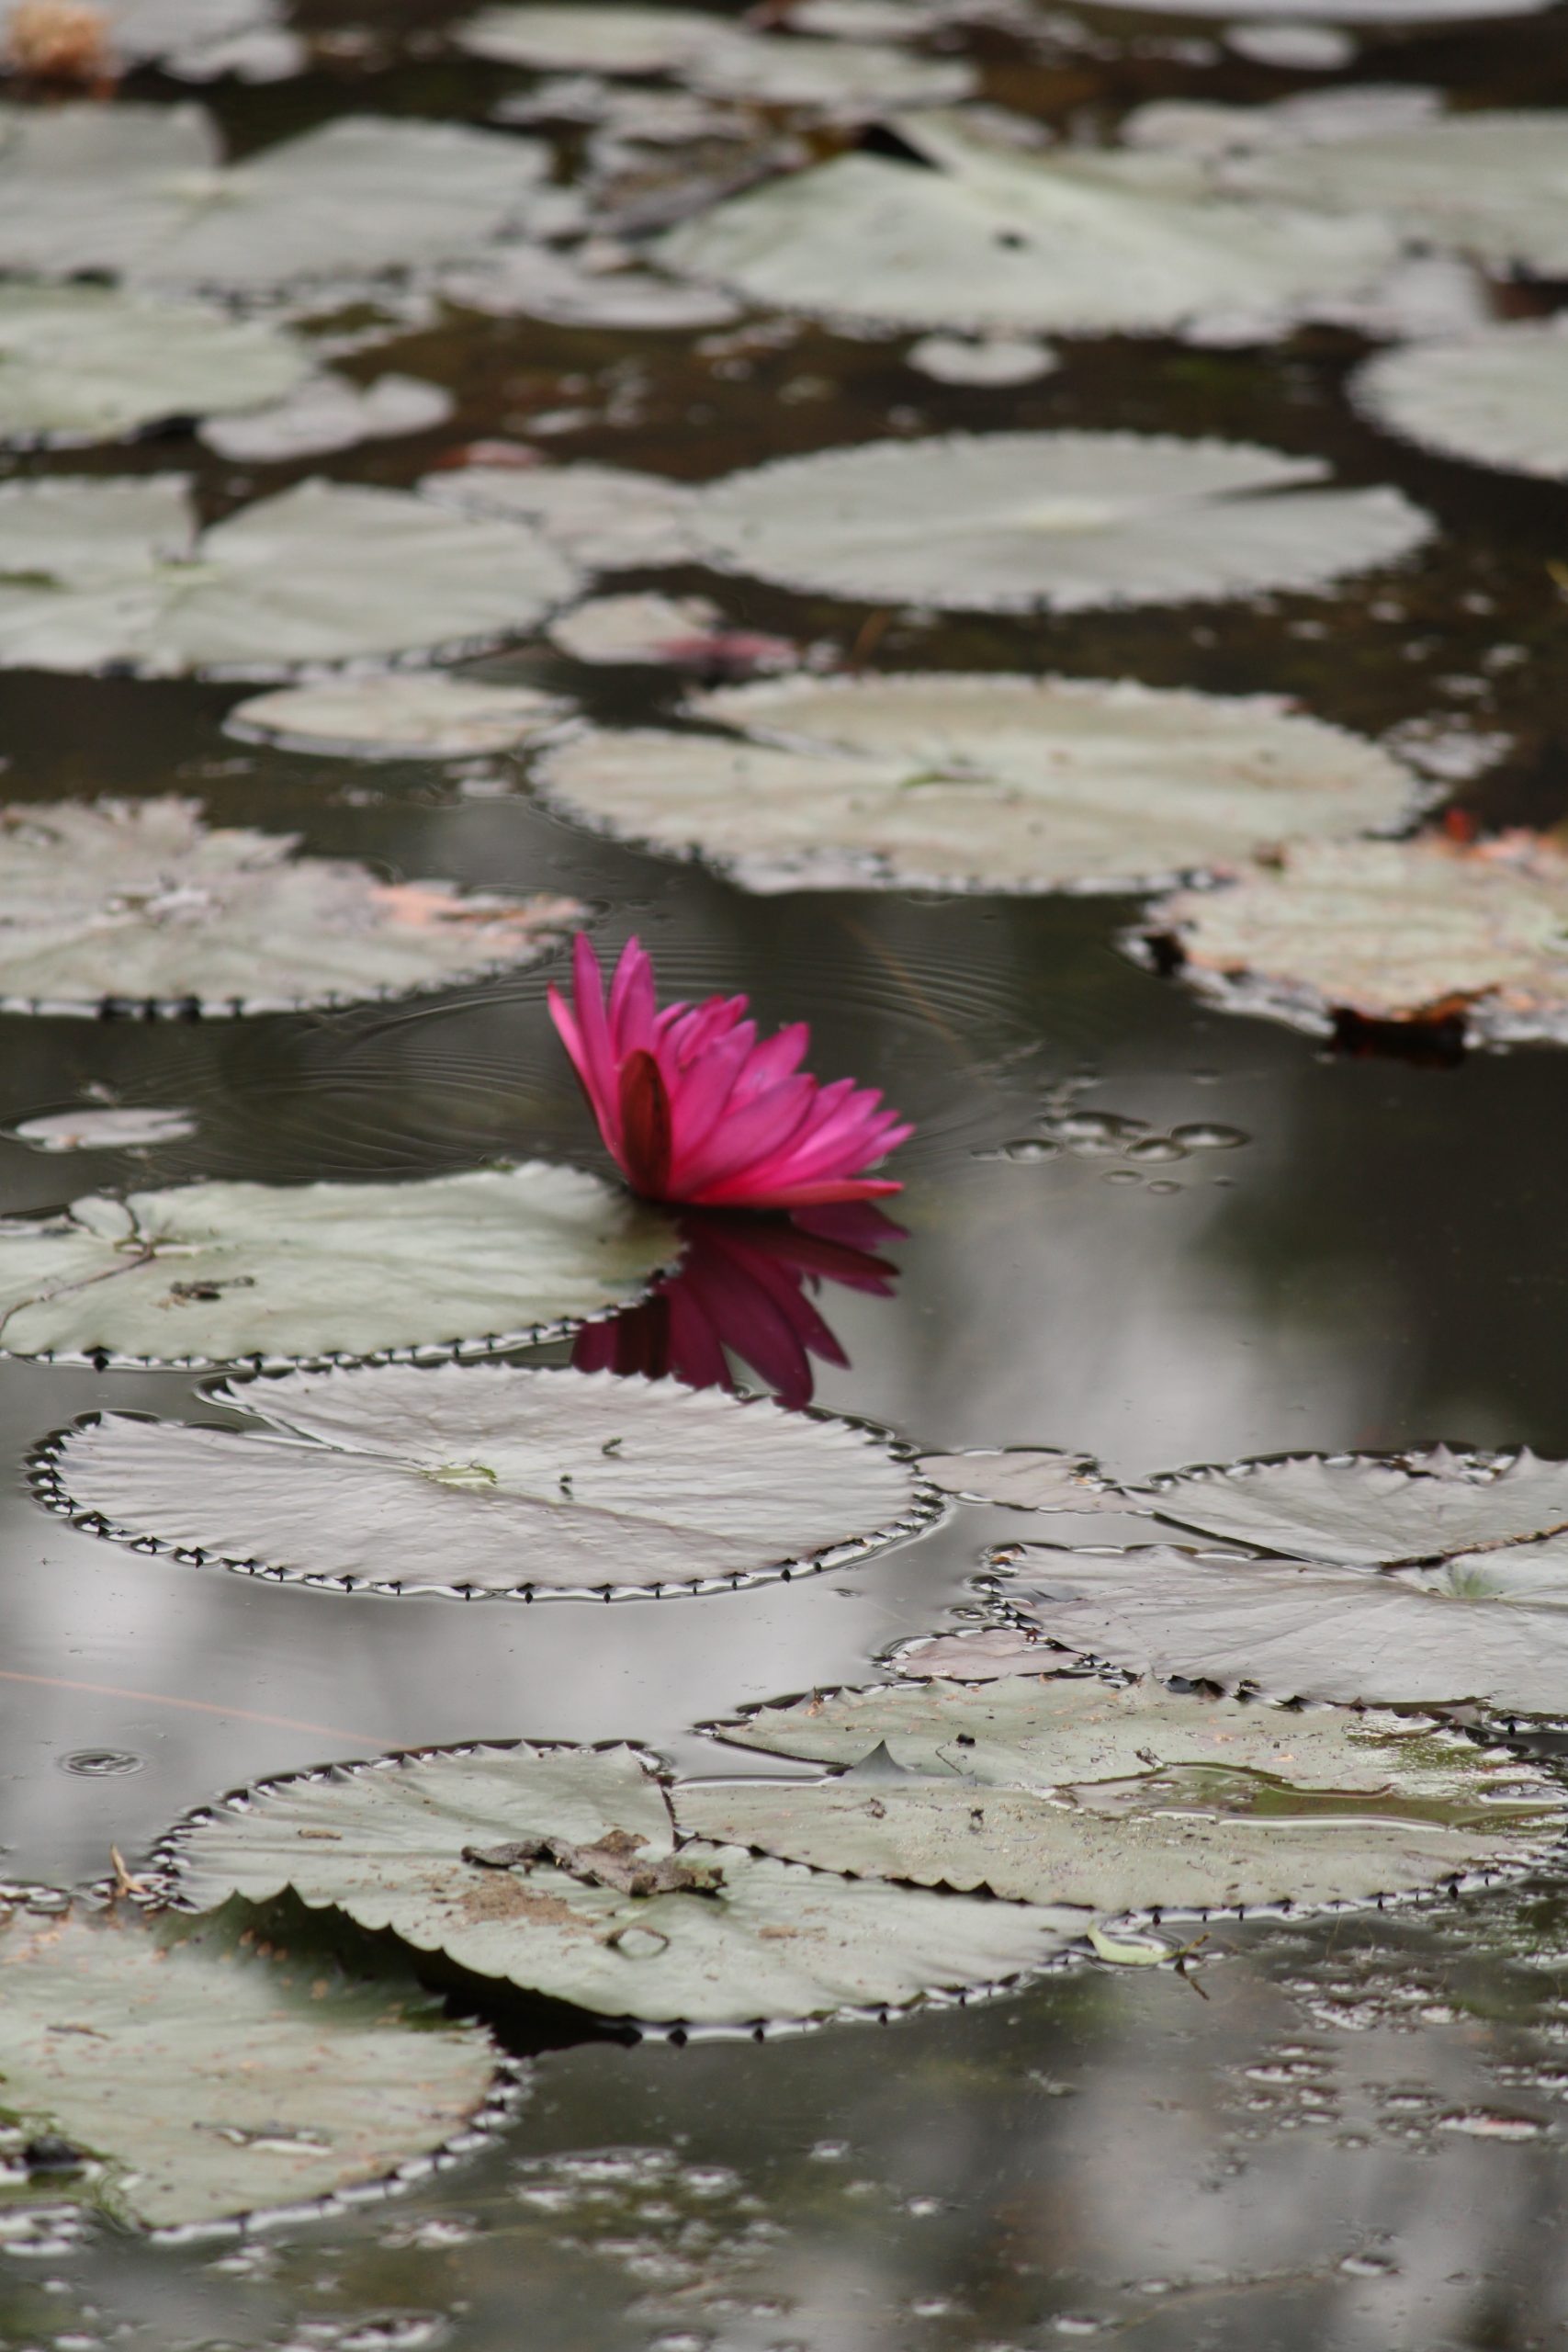 Lilly flower in the pond.